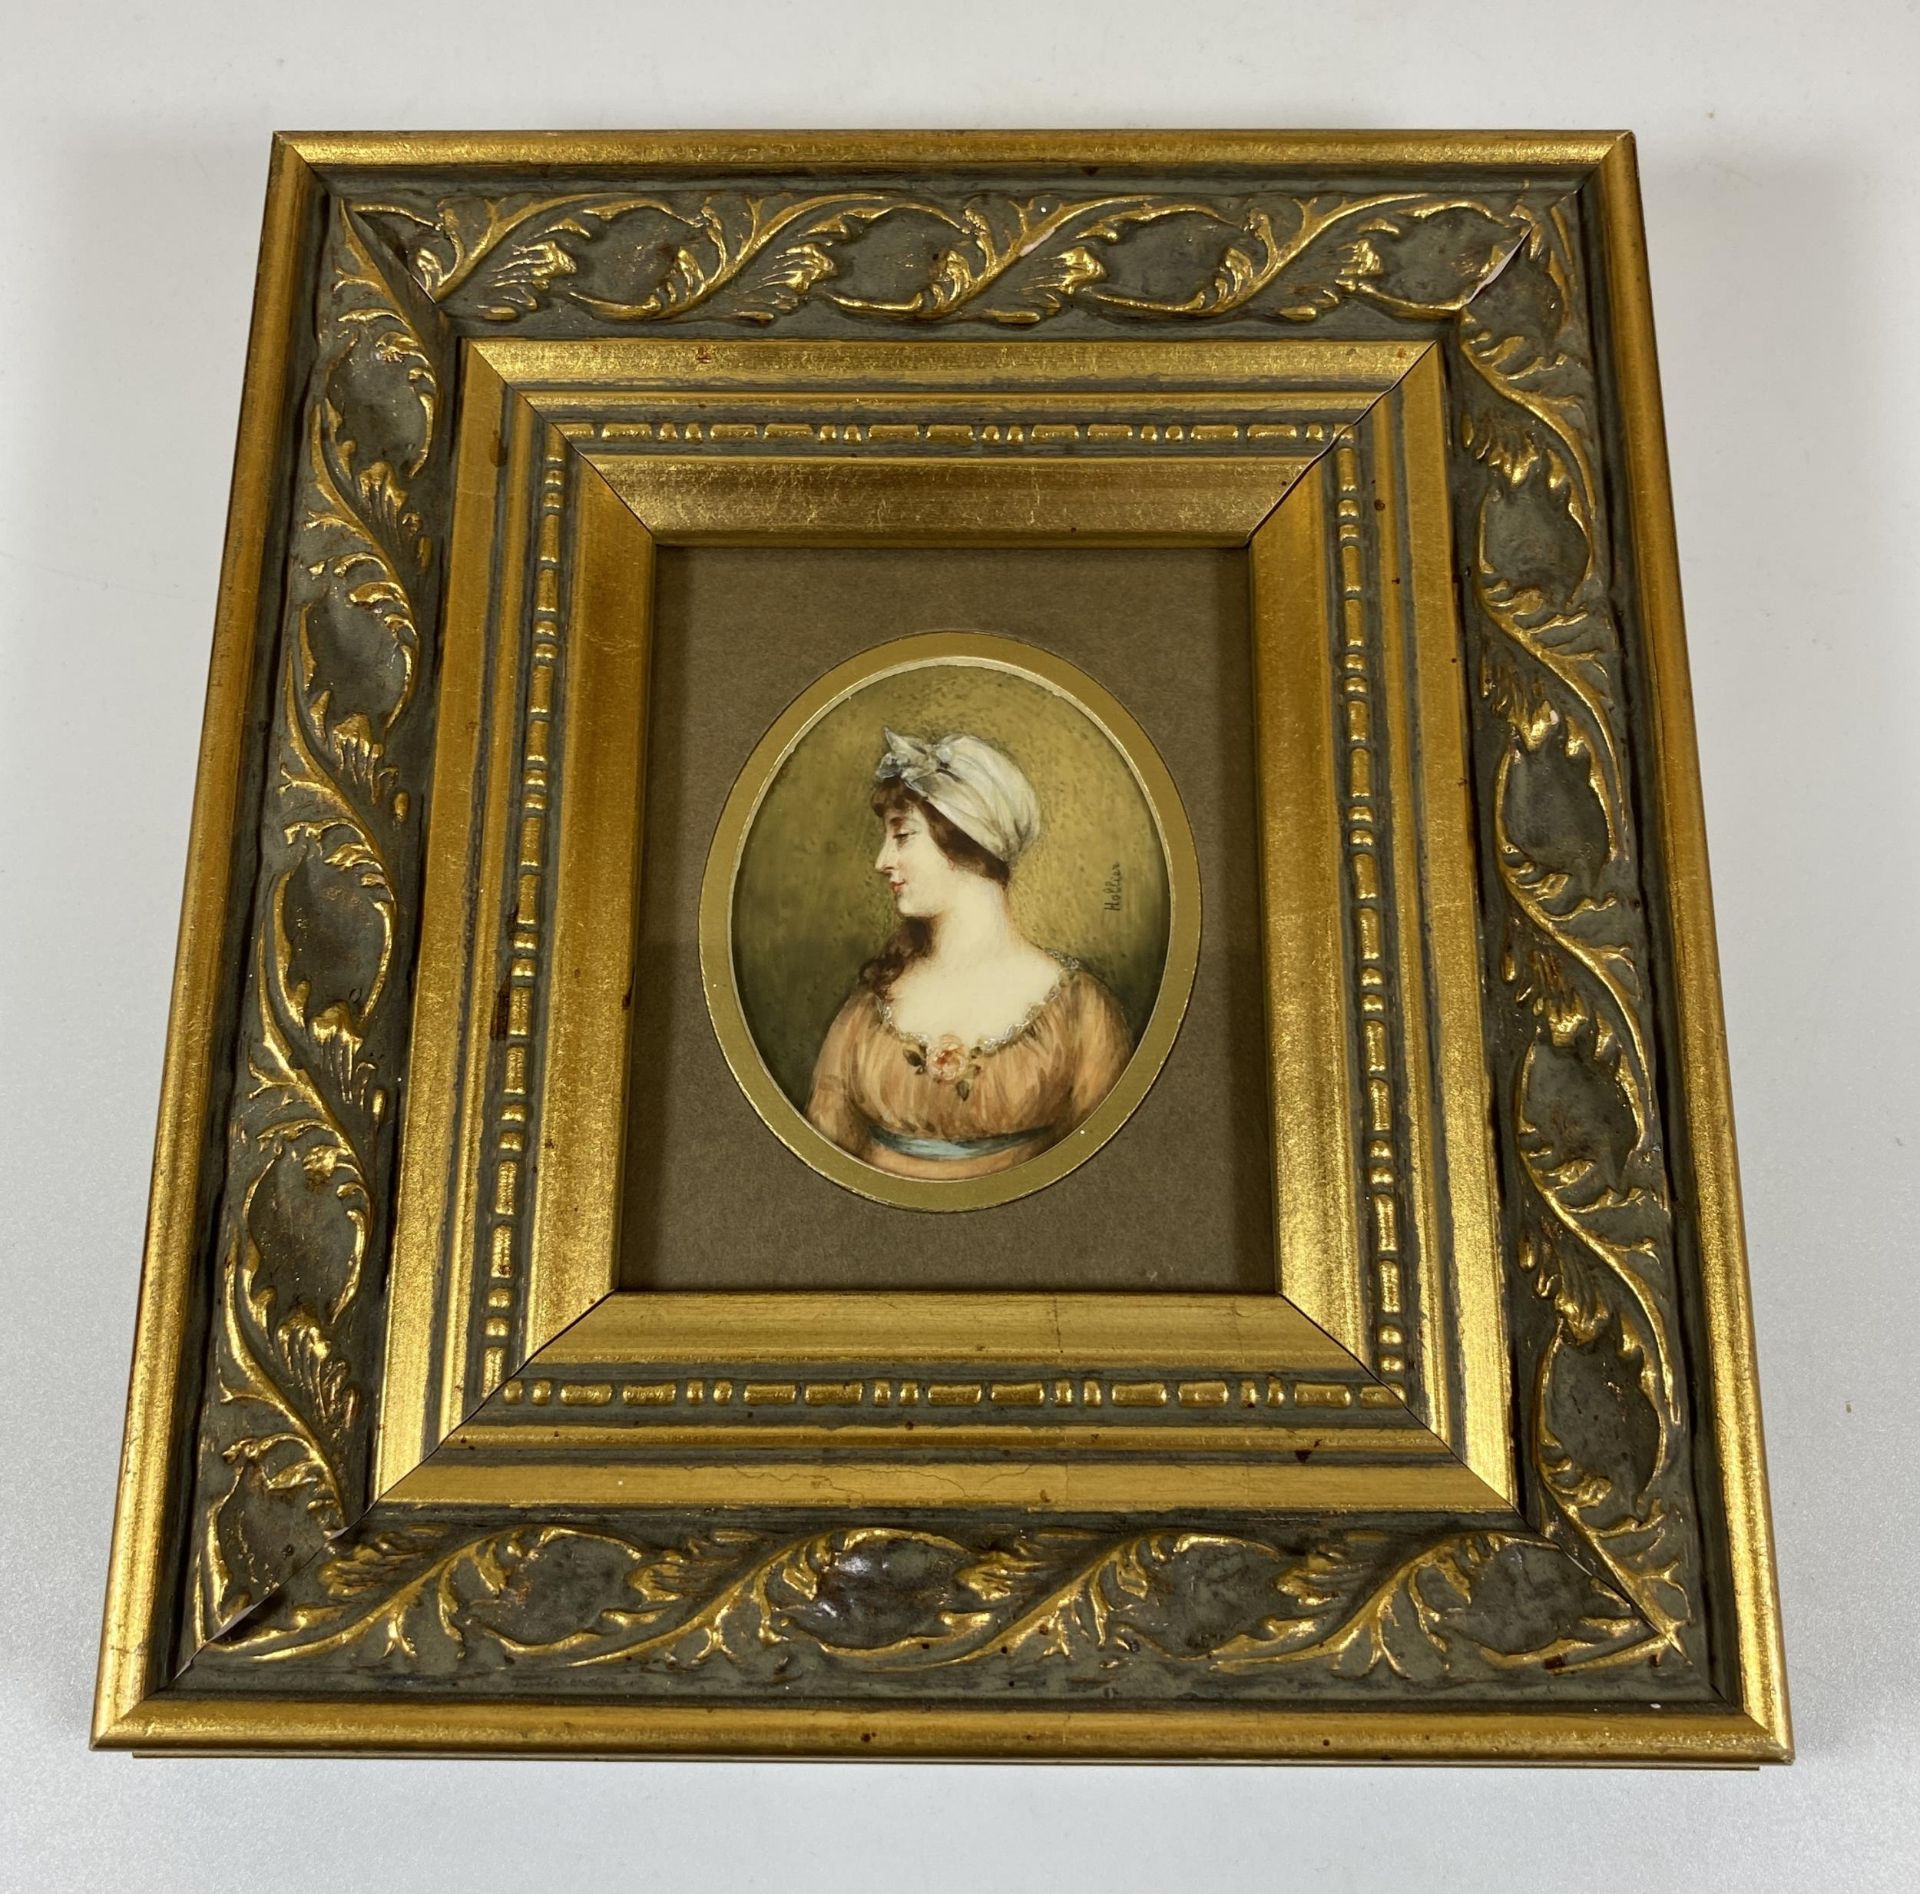 A HAND HIGHLIGHTED PORTRAIT OF A LADY, SIGNED, IN LATER GILT FRAME, 19 X 17CM